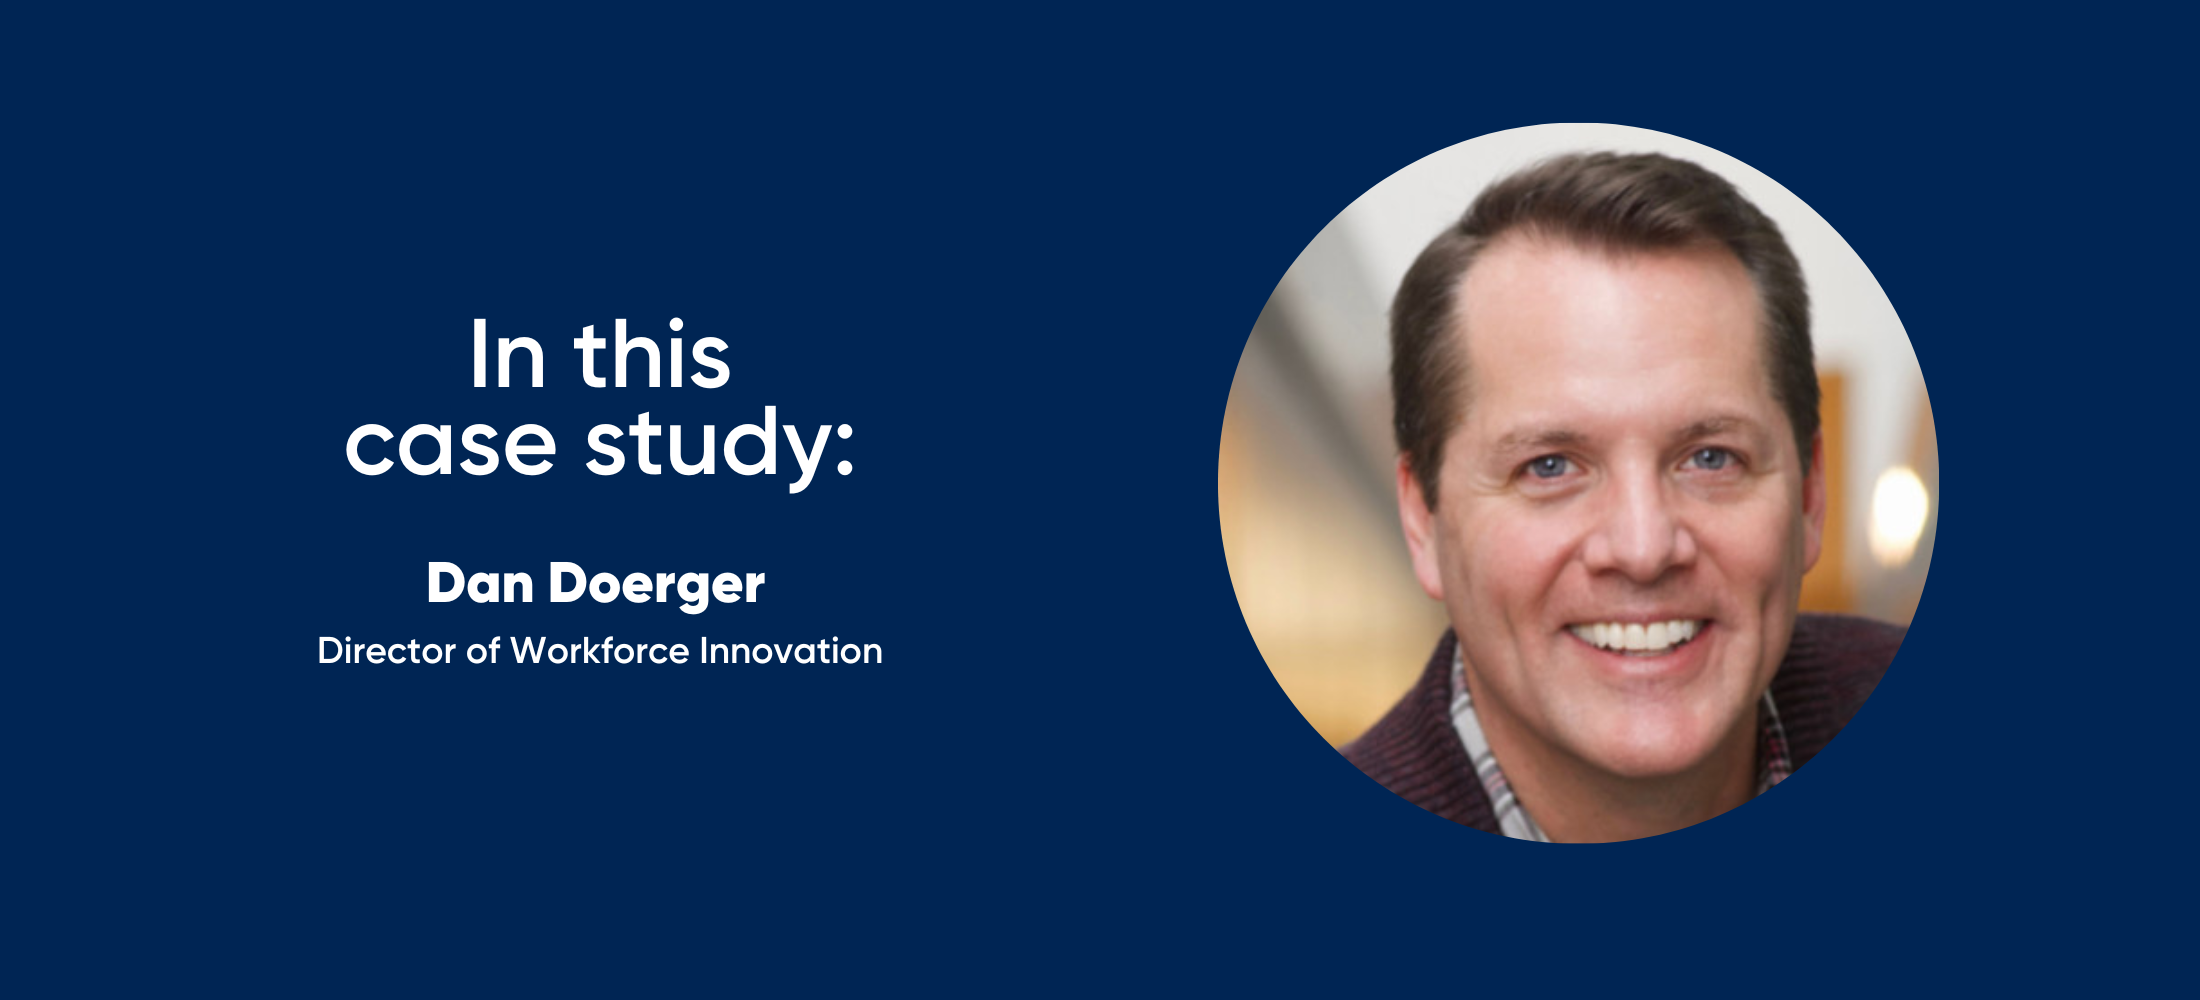 in this case study: Dan Doerger, Director of Workforce Innovation